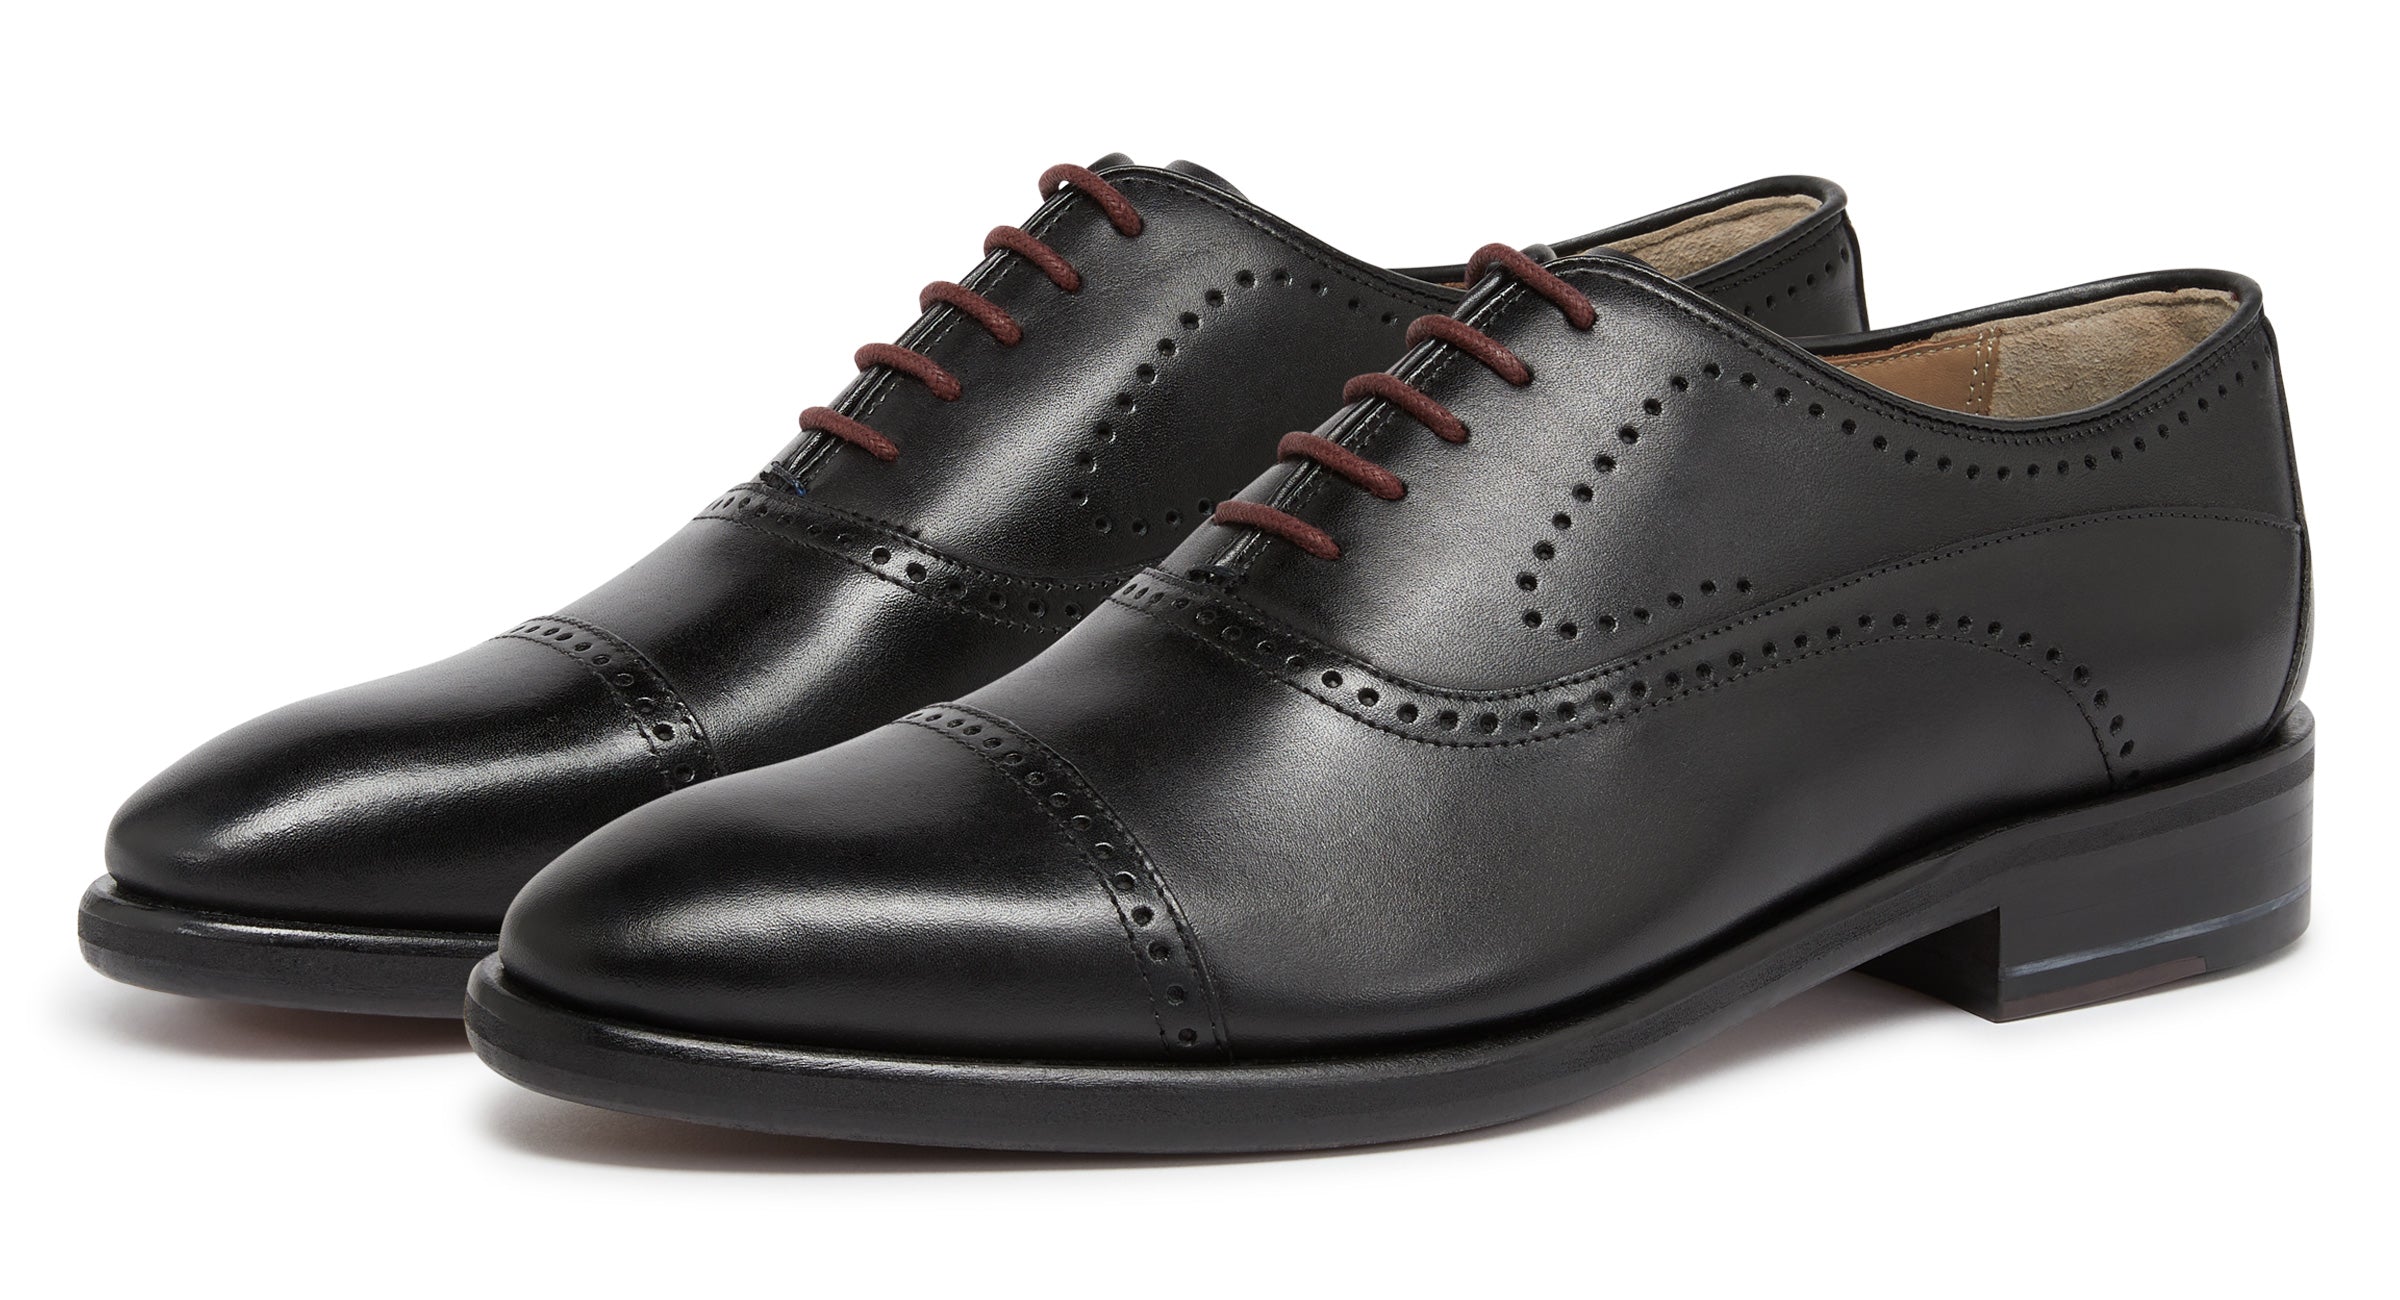 Mallory Black | Leather Oxford Shoe | Men's Shoes | Oliver Sweeney